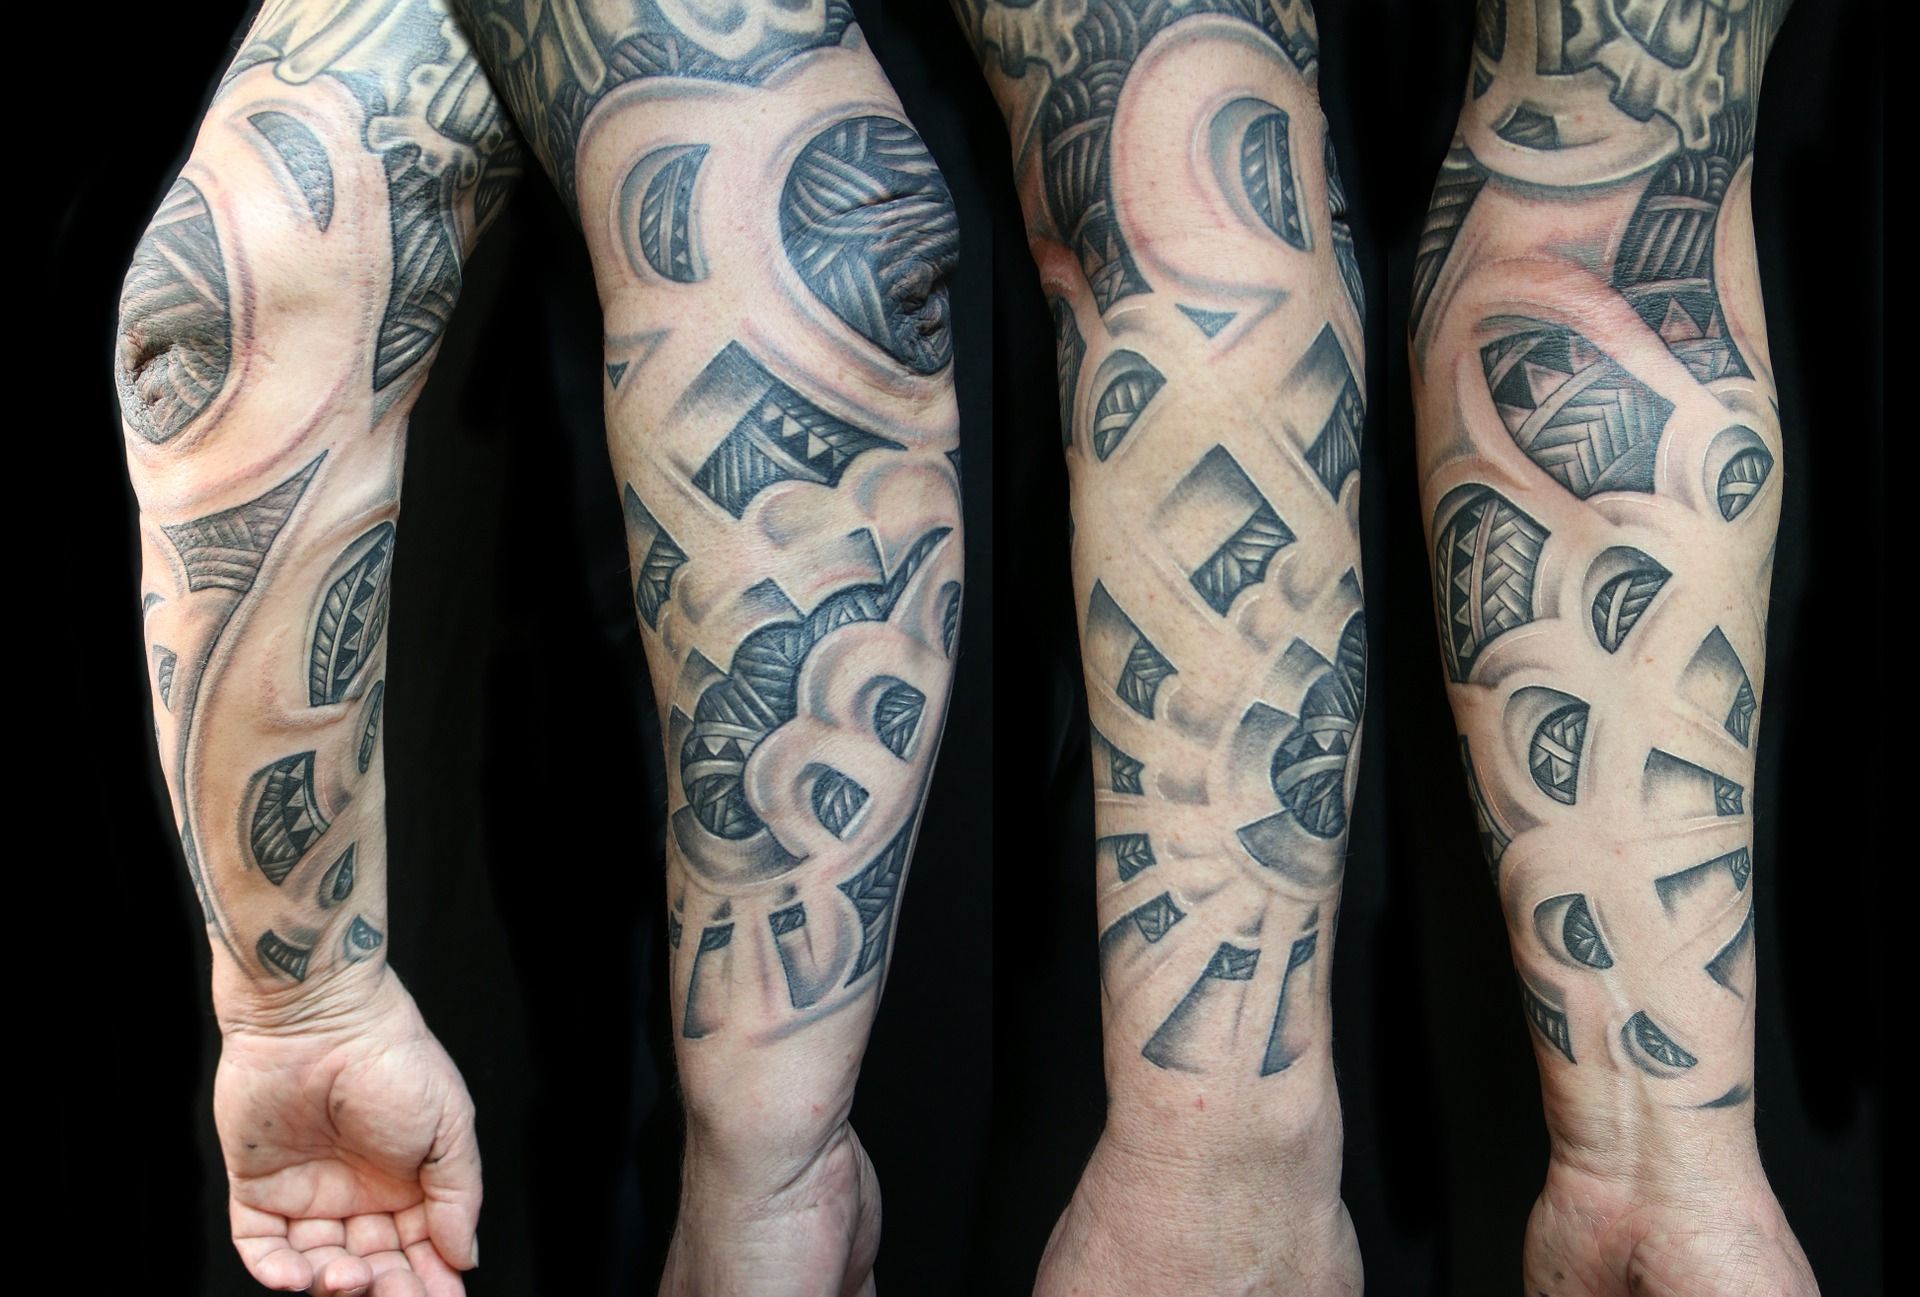 Marines allowed to have “sleeve tattoos”,  revised Marine Corps policy says